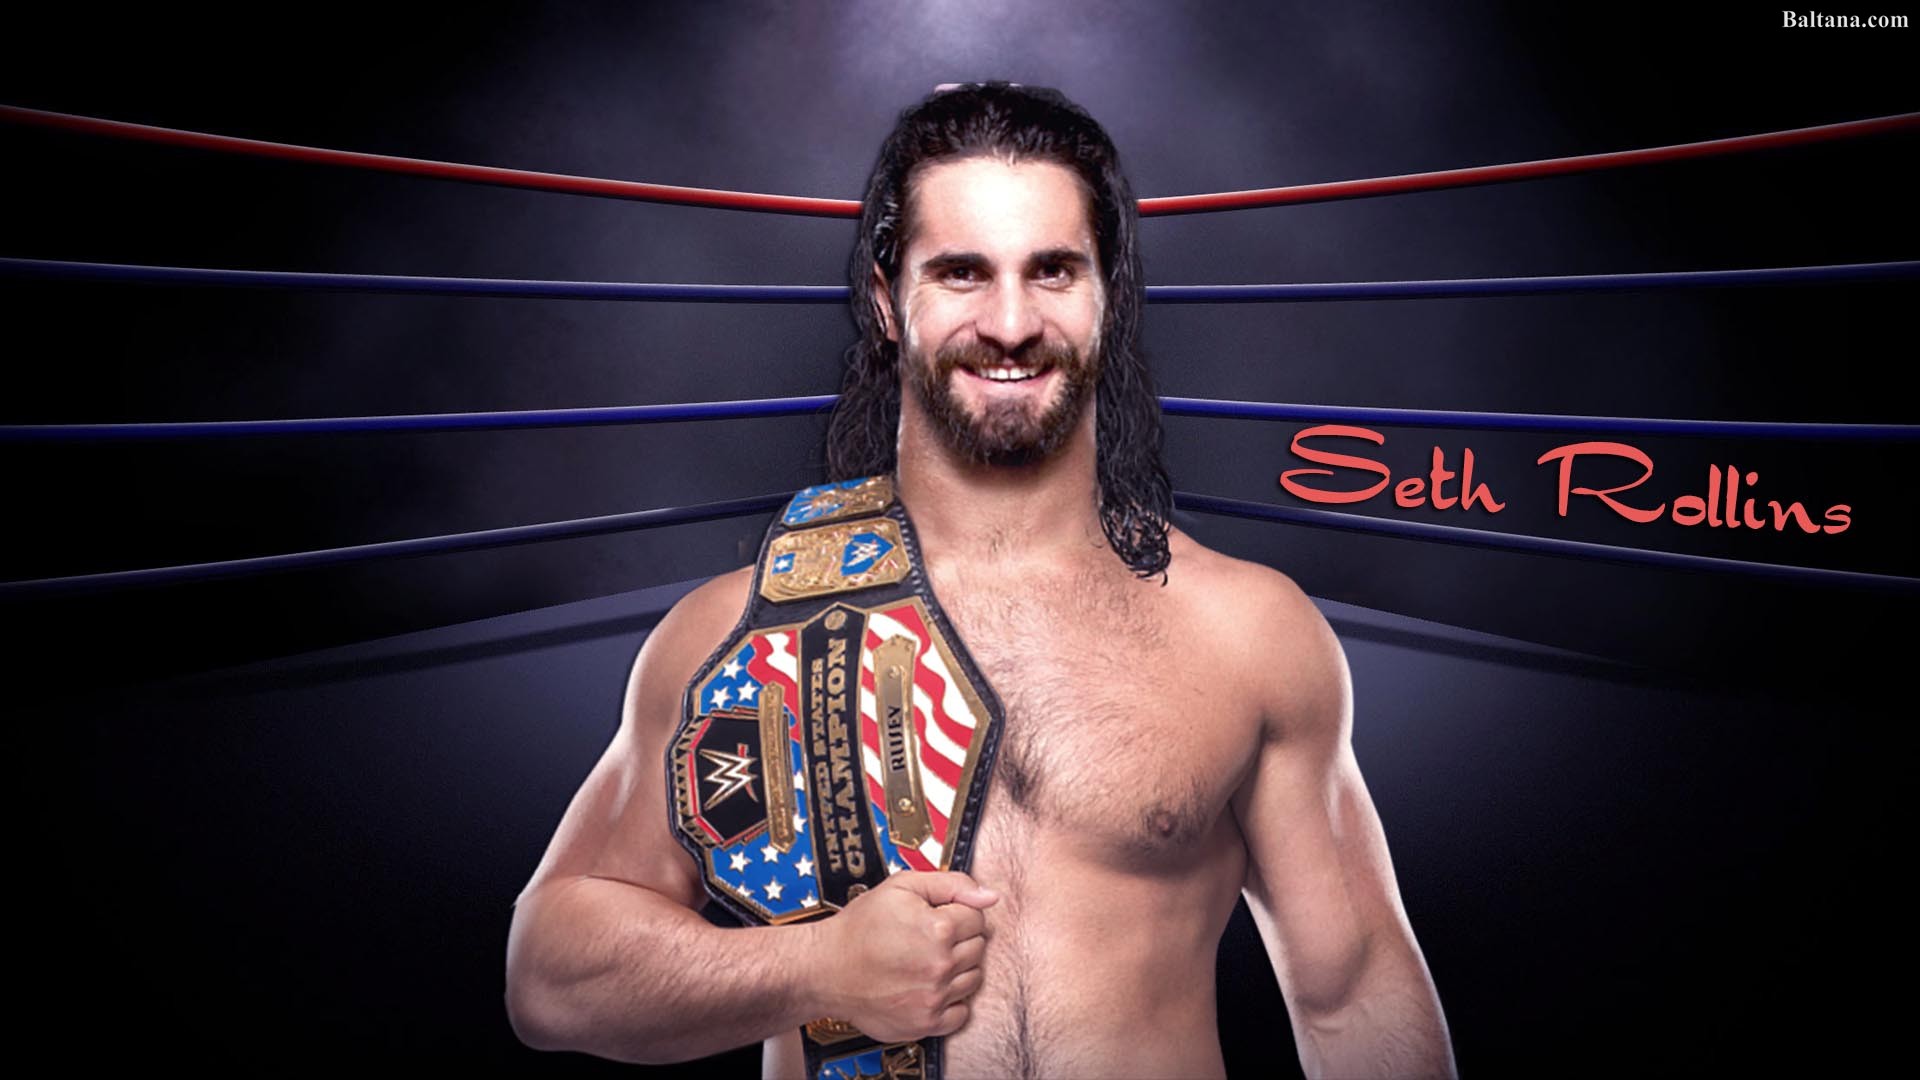 Seth Rollins Wallpaper Hd - Download The Photos Of Seth Rollins With United States - HD Wallpaper 